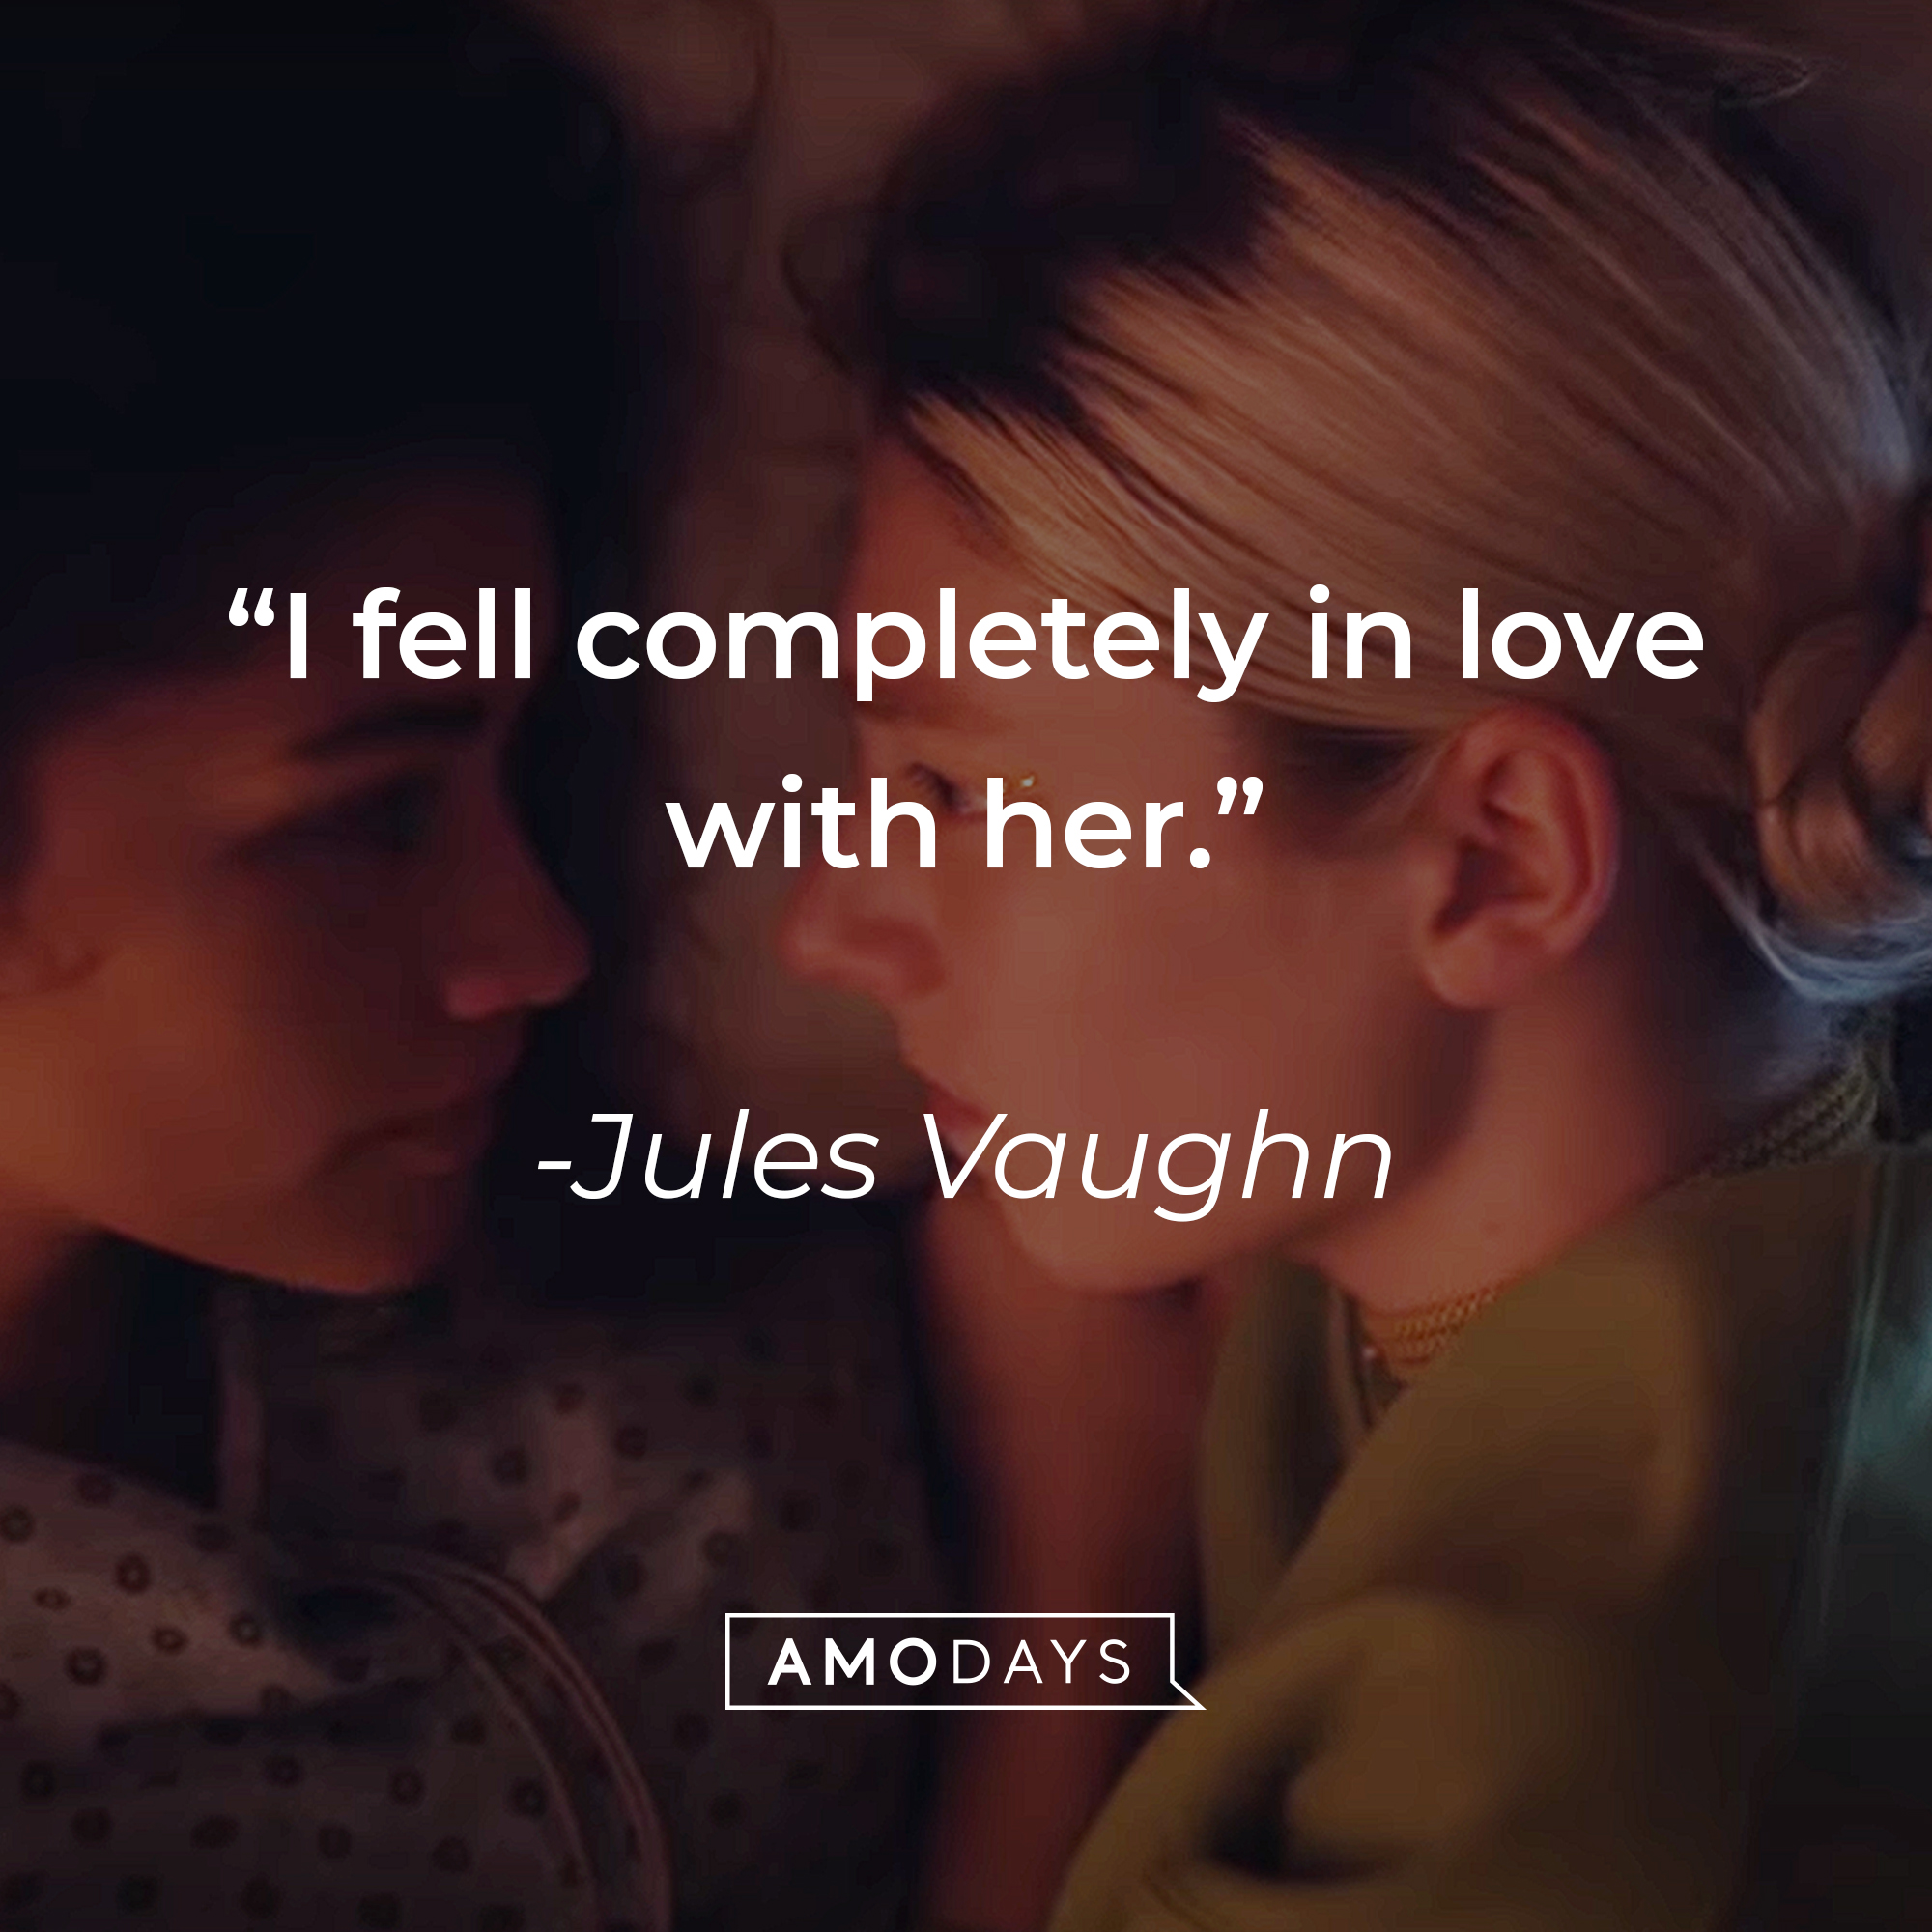 Jules Vaughn with her quote: "I fell completely in love with her." | Source: HBO